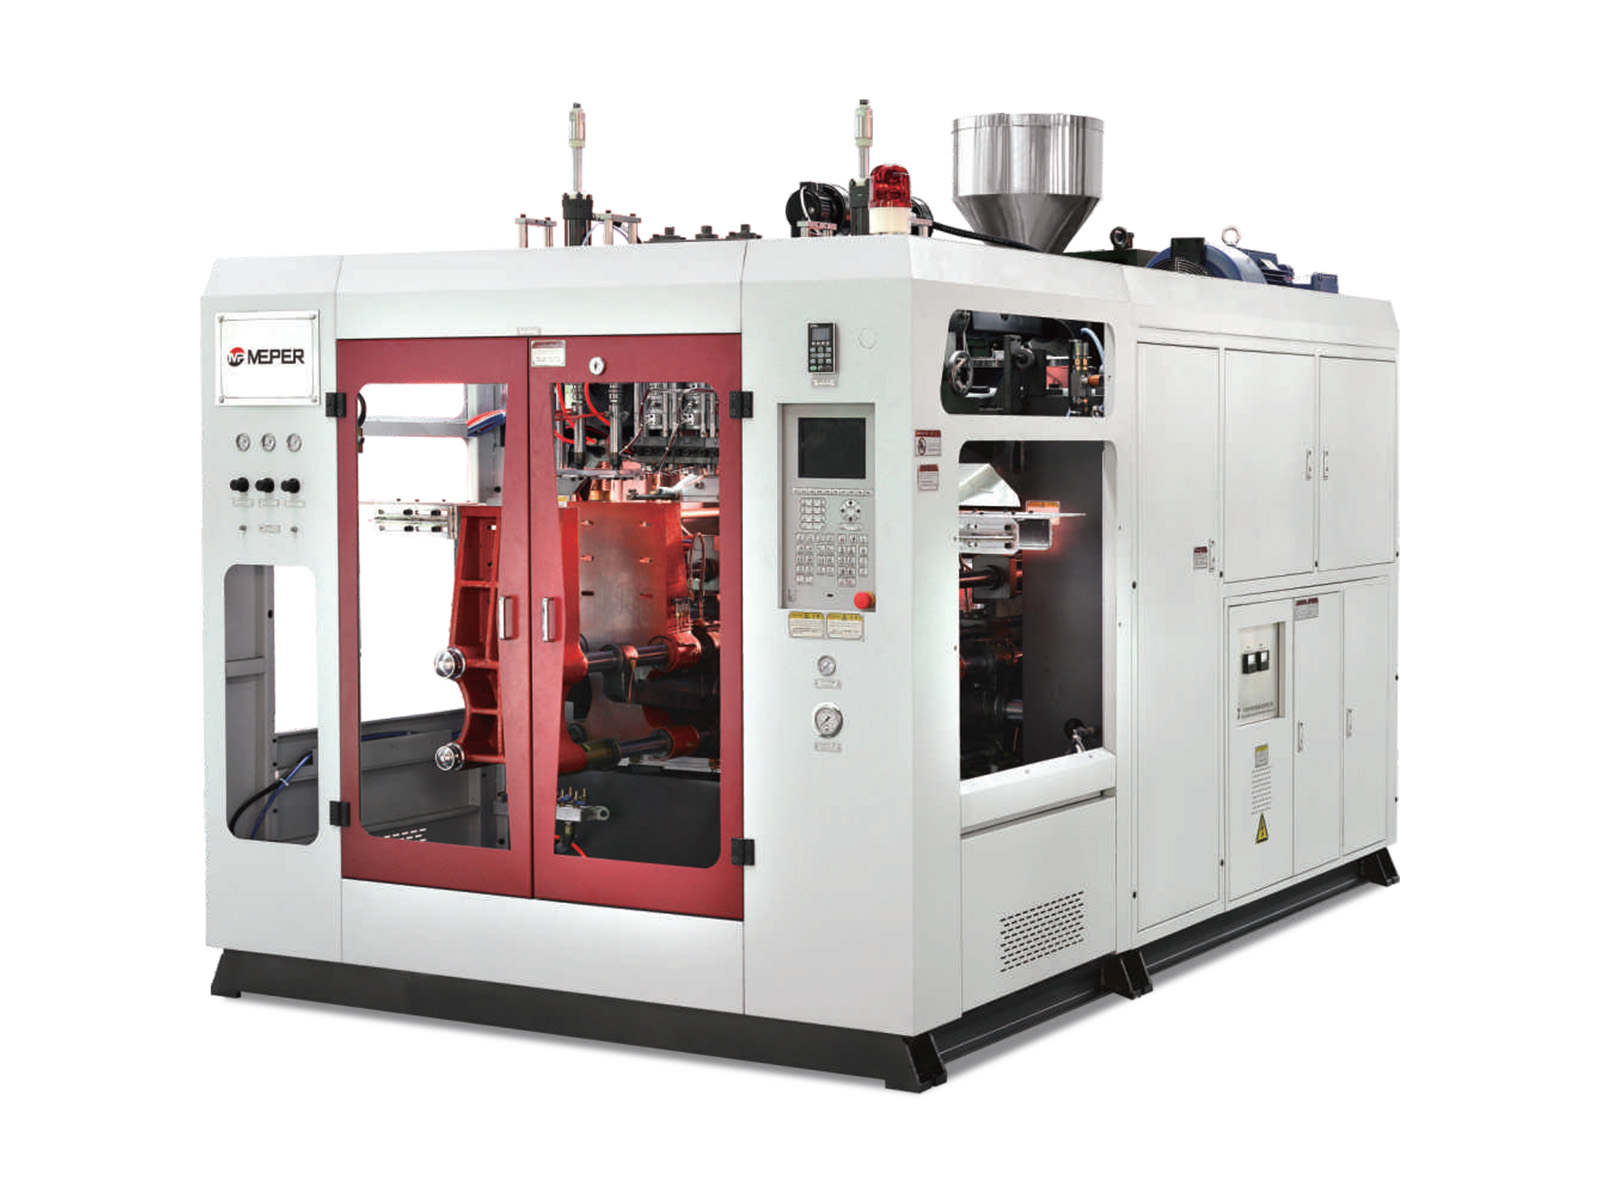 Meper 10ml-1L HDPE Extrusion Blow Molding Machine Fully Automatic MP70D